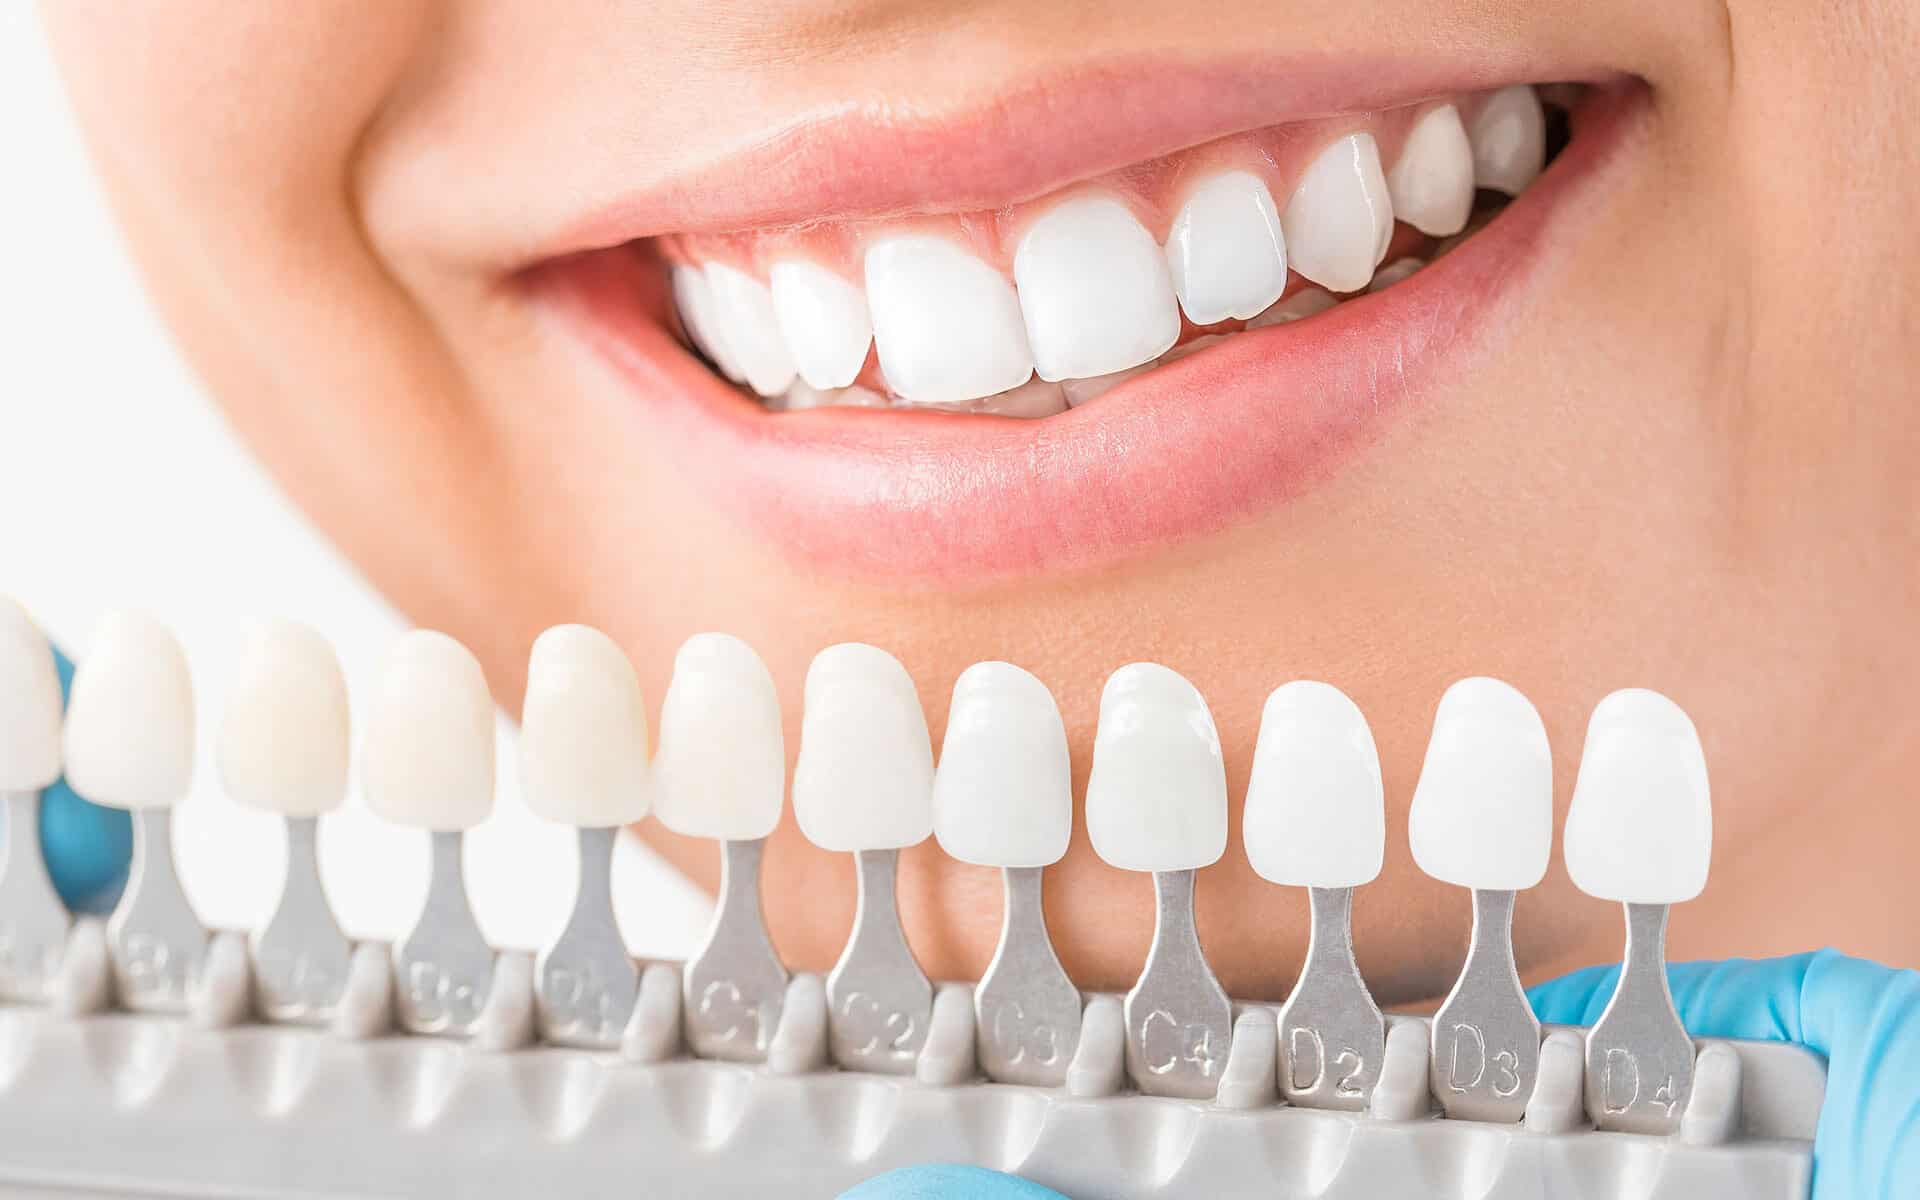 Featured image for “How to Find the Best Implant Dentist?”